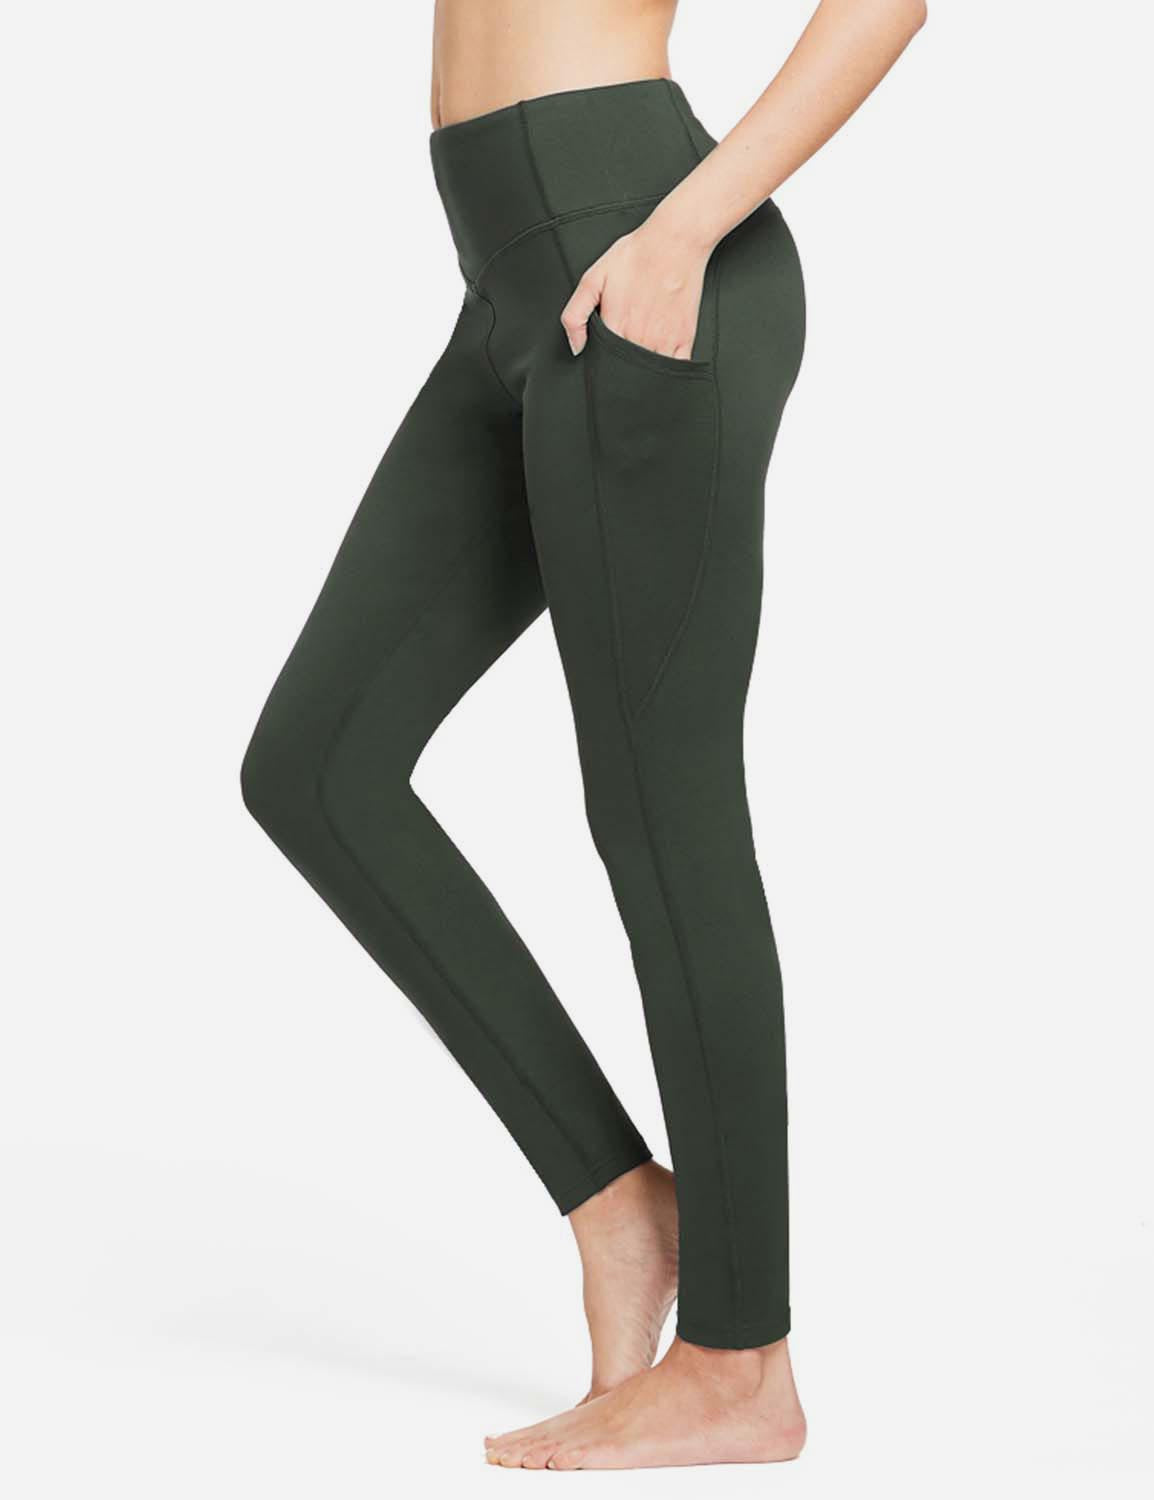 Baleaf Women's Thermal High Rise Fleece Lined Contour Leggings abh145 Army Green Side